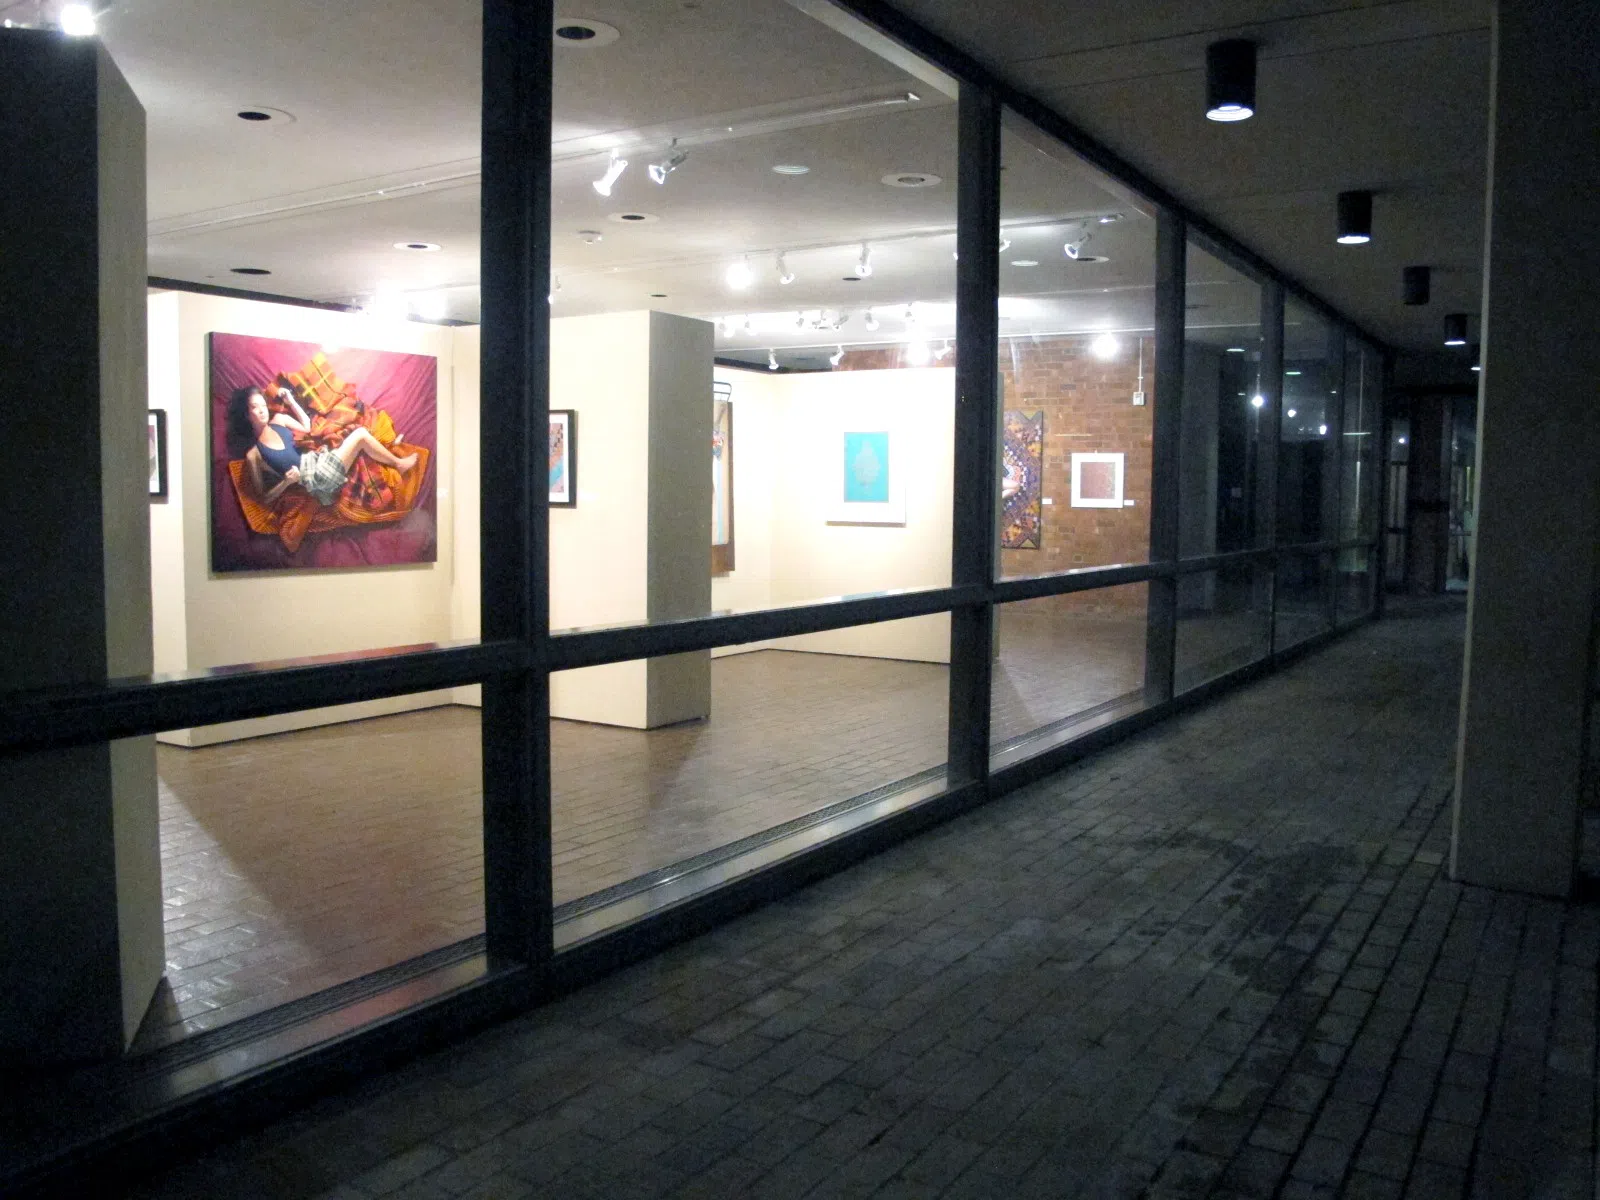 A well-lit art gallery is visible behind windows lining an outdoor brick path at night.